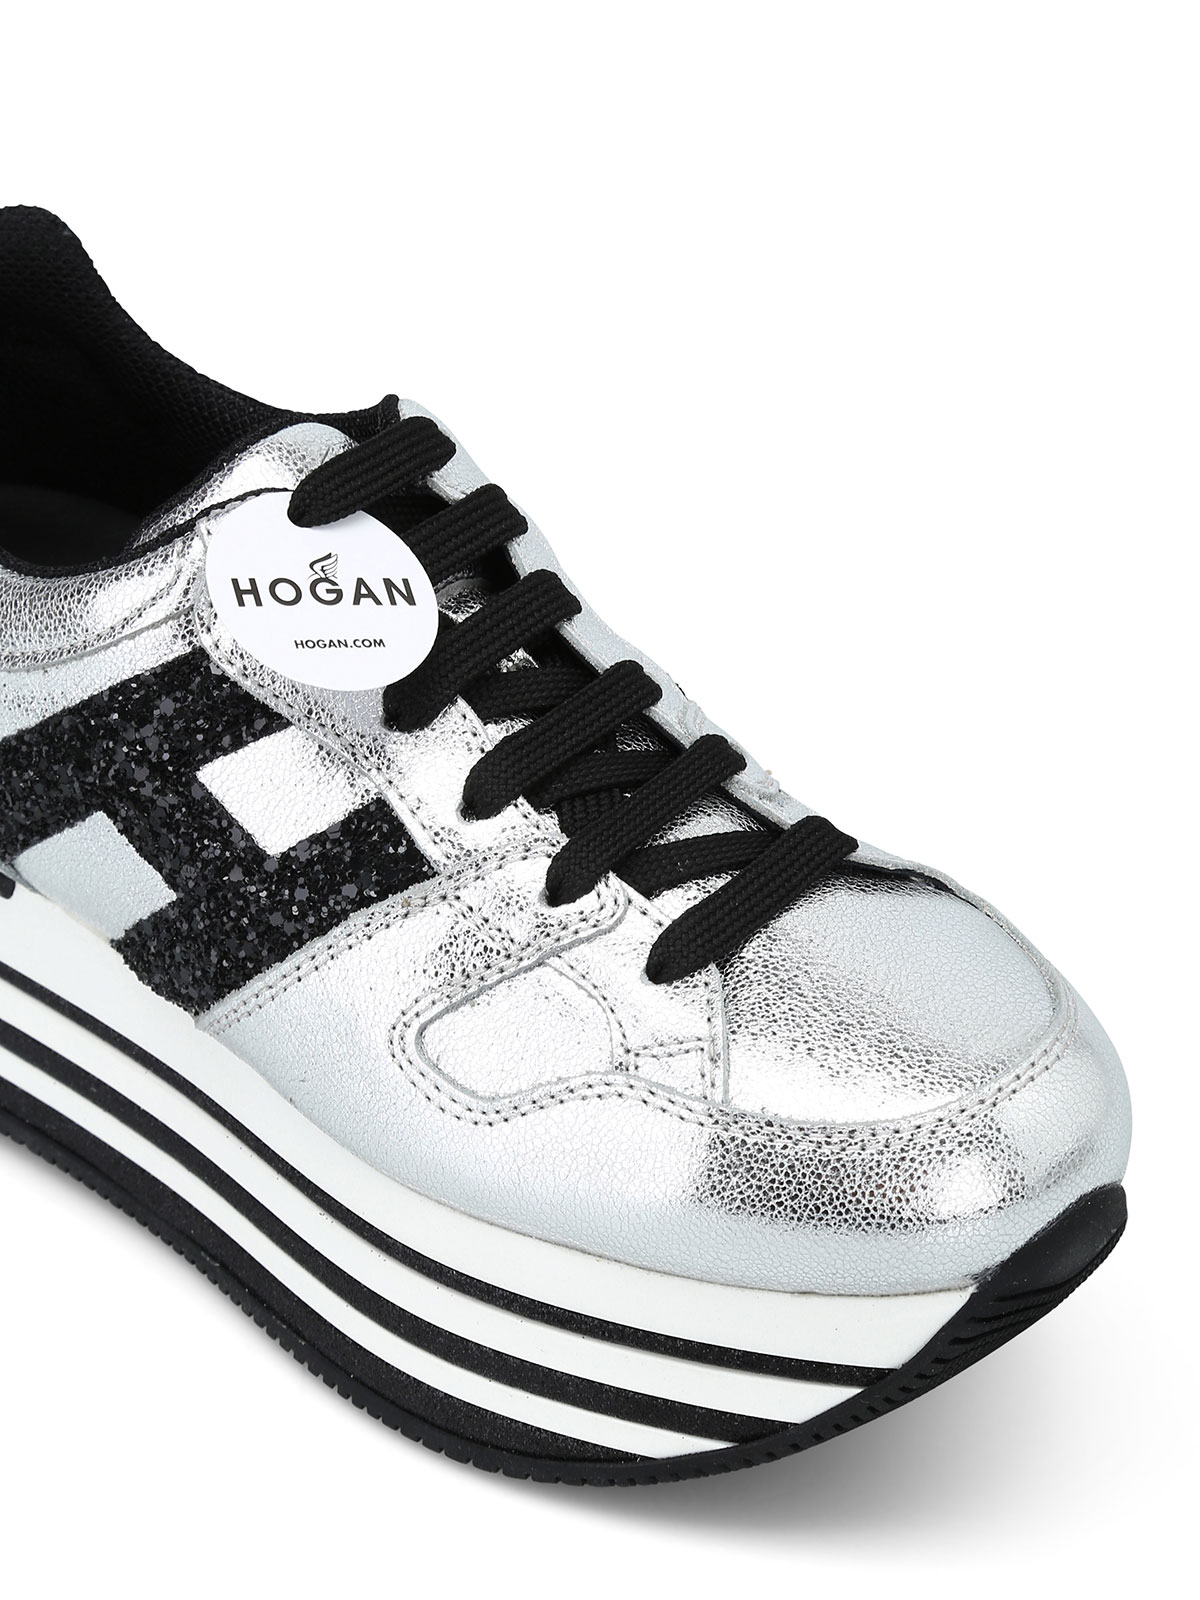 uitvinden karton silhouet Trainers Hogan - Maxi H222 silver leather sneakers - HXW3680T548JHD1920